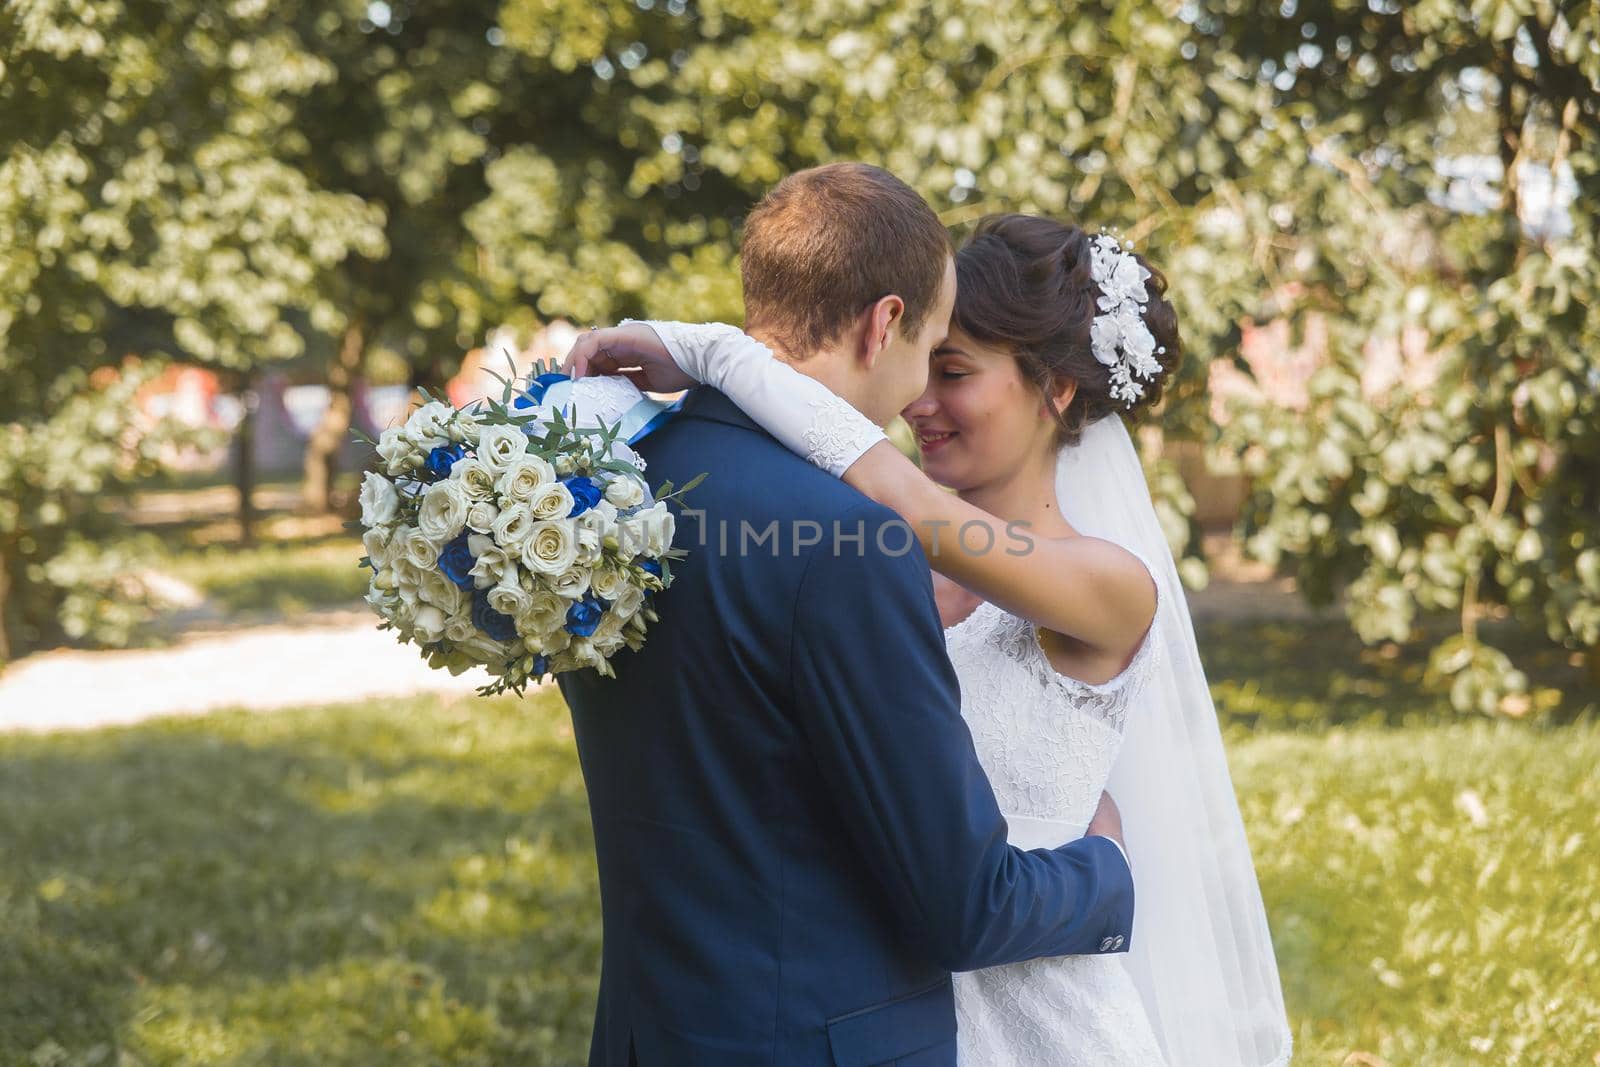 Belarus, Minsk region - August 11, 2018: Wedding. The hugs and tenderness of the happy bride and groom on a walk in the outdoor park background by AYDO8